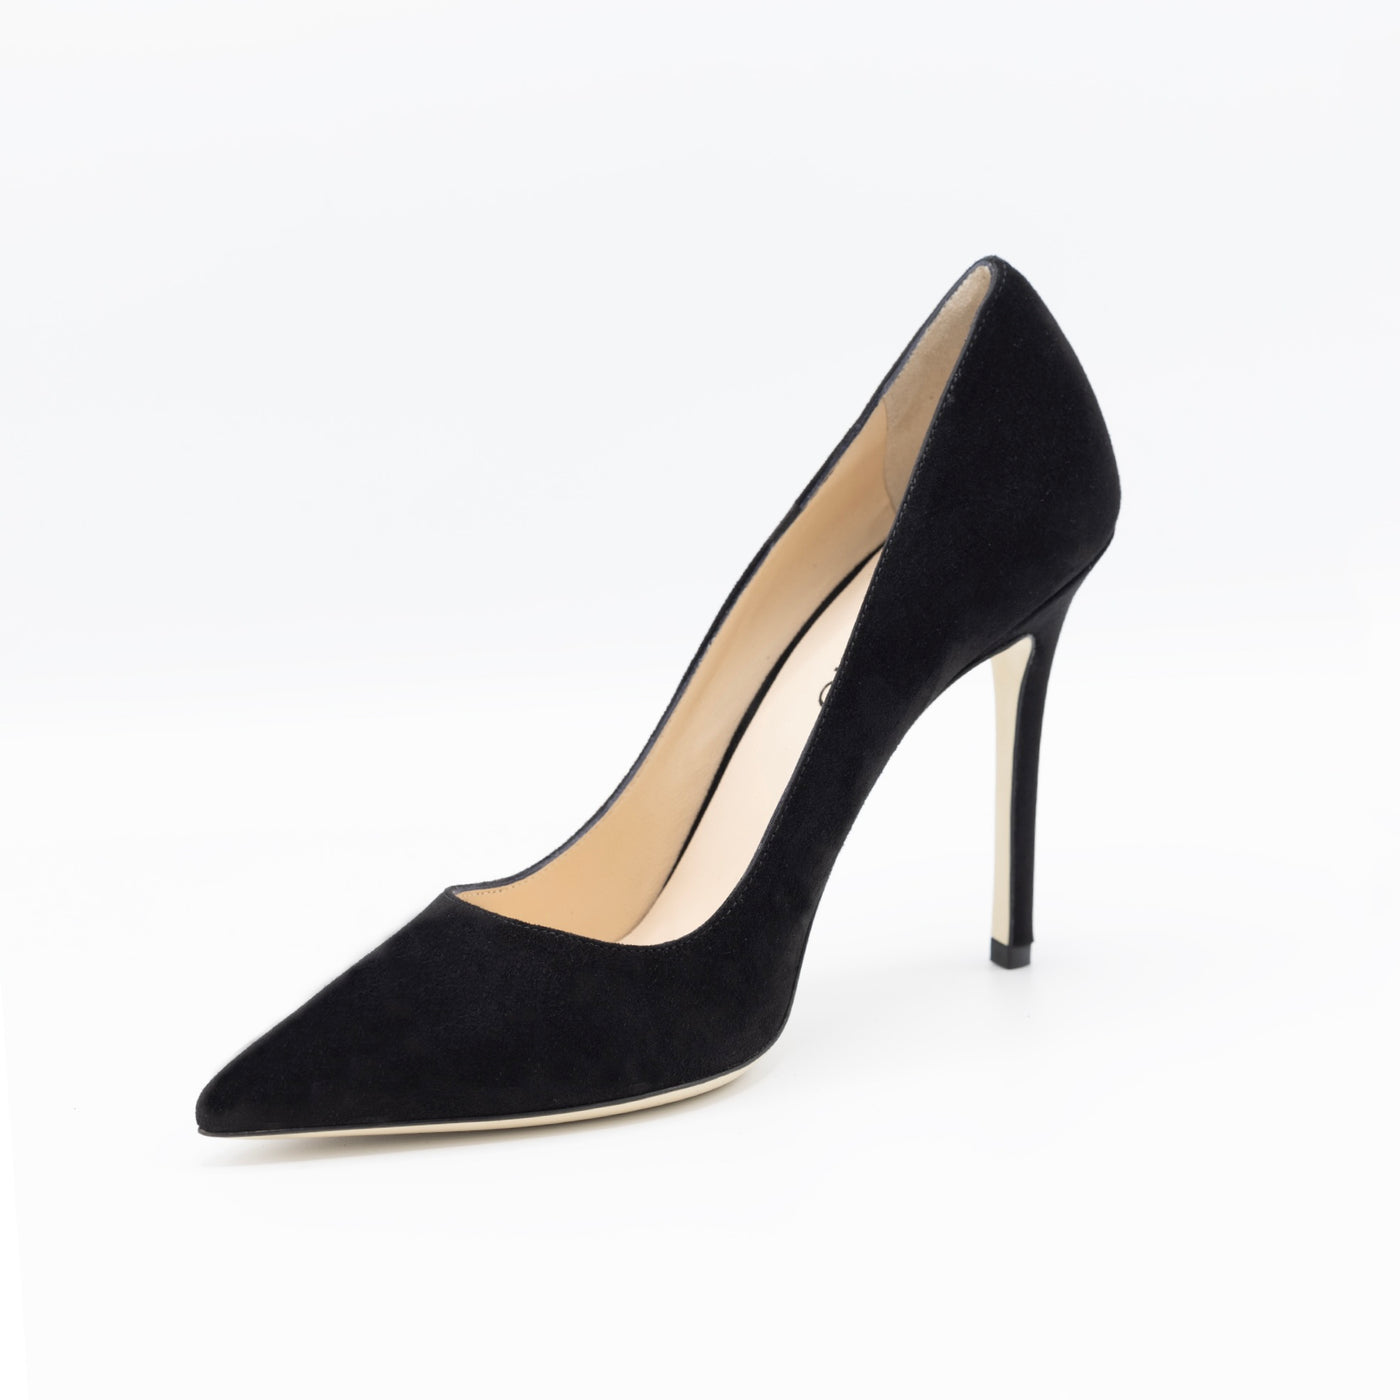 Pointy toe high heel black suede leather pumps